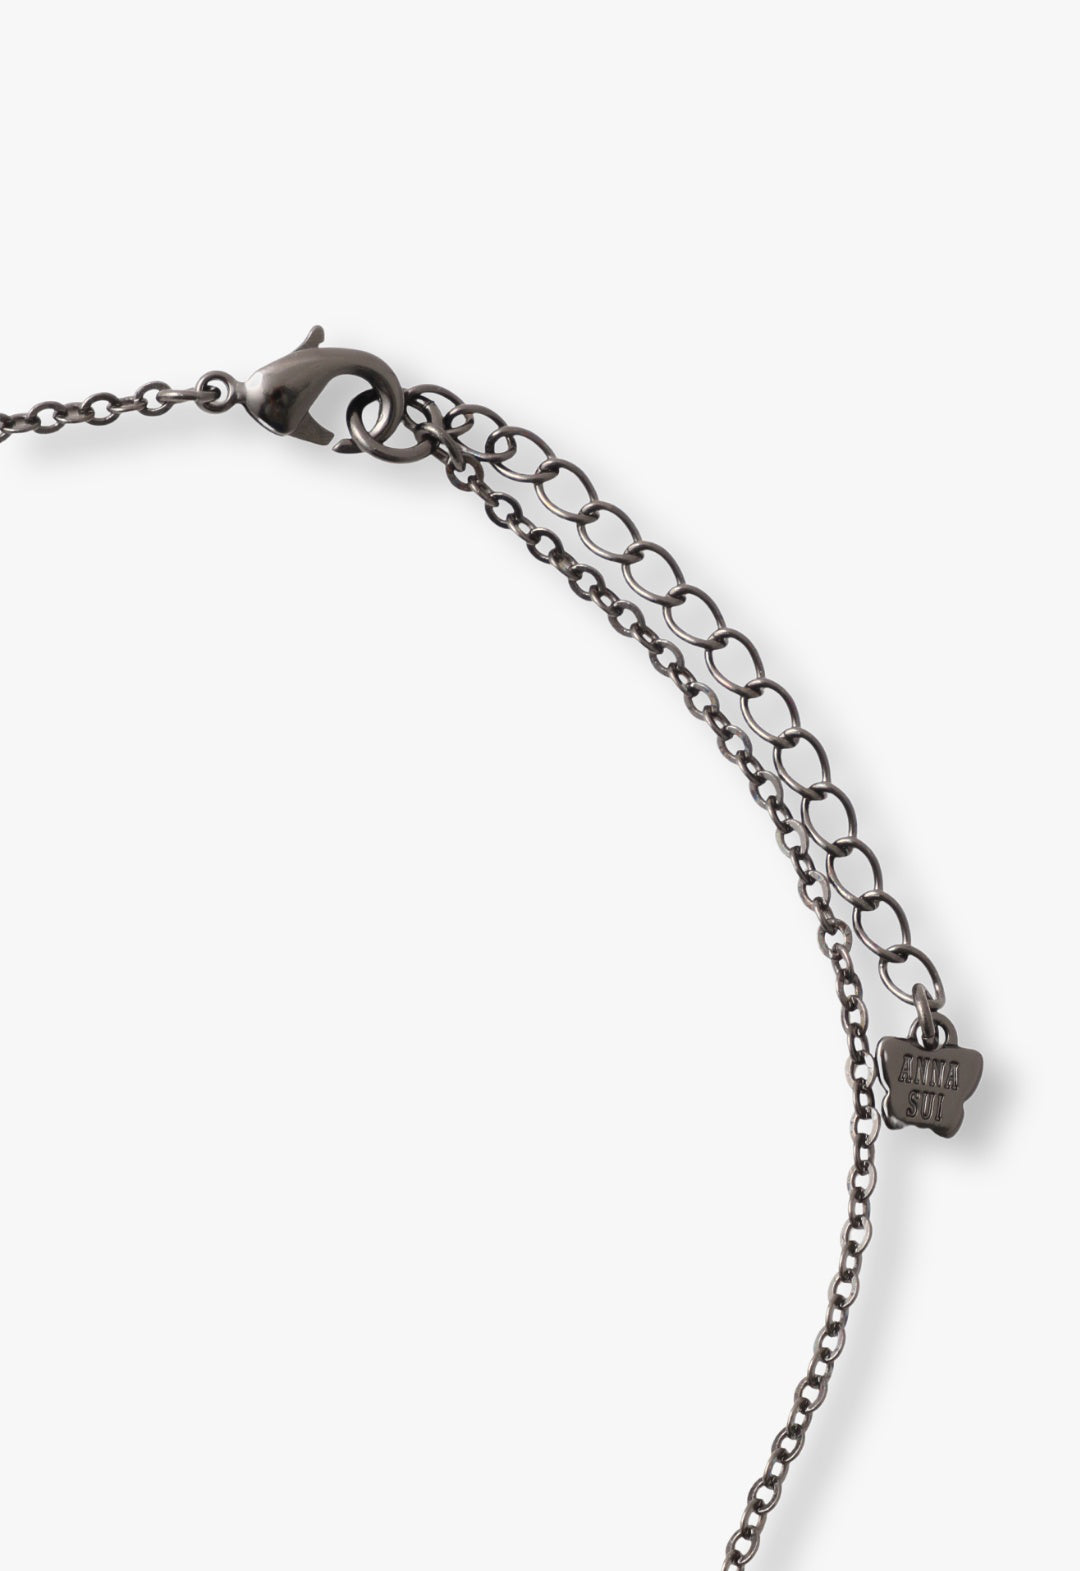 Gunmetal chain, lobster claw clasp lock, with Anna Sui imprint logo at the end